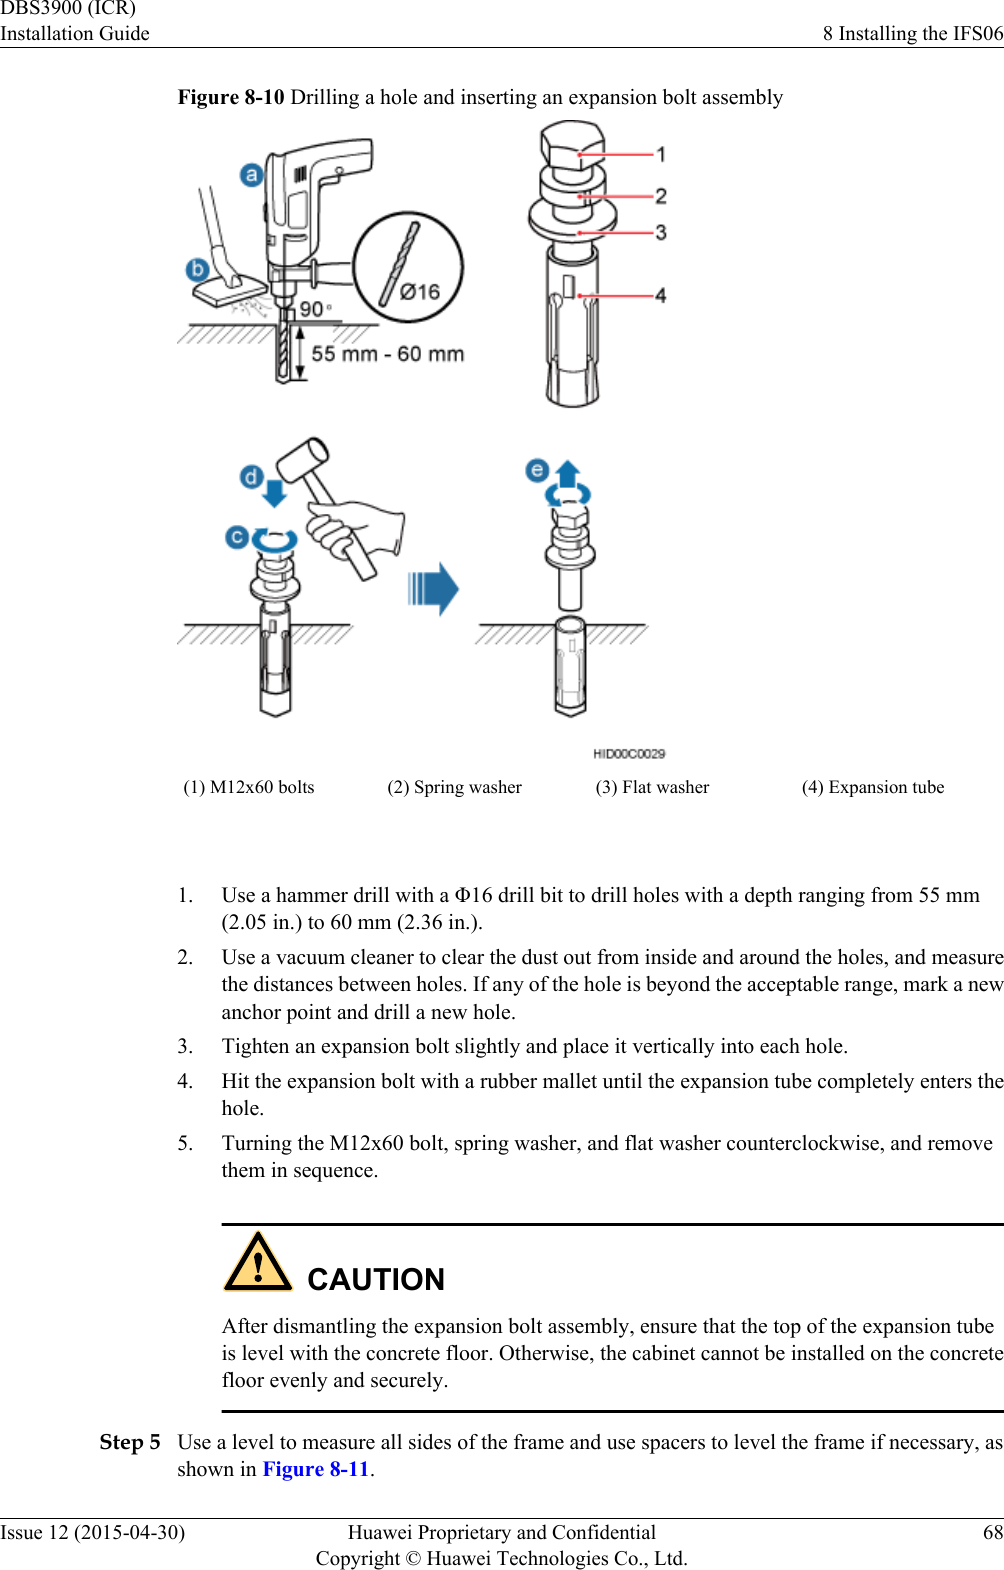 Figure 8-10 Drilling a hole and inserting an expansion bolt assembly(1) M12x60 bolts (2) Spring washer (3) Flat washer (4) Expansion tube 1. Use a hammer drill with a Φ16 drill bit to drill holes with a depth ranging from 55 mm(2.05 in.) to 60 mm (2.36 in.).2. Use a vacuum cleaner to clear the dust out from inside and around the holes, and measurethe distances between holes. If any of the hole is beyond the acceptable range, mark a newanchor point and drill a new hole.3. Tighten an expansion bolt slightly and place it vertically into each hole.4. Hit the expansion bolt with a rubber mallet until the expansion tube completely enters thehole.5. Turning the M12x60 bolt, spring washer, and flat washer counterclockwise, and removethem in sequence.CAUTIONAfter dismantling the expansion bolt assembly, ensure that the top of the expansion tubeis level with the concrete floor. Otherwise, the cabinet cannot be installed on the concretefloor evenly and securely.Step 5 Use a level to measure all sides of the frame and use spacers to level the frame if necessary, asshown in Figure 8-11.DBS3900 (ICR)Installation Guide 8 Installing the IFS06Issue 12 (2015-04-30) Huawei Proprietary and ConfidentialCopyright © Huawei Technologies Co., Ltd.68